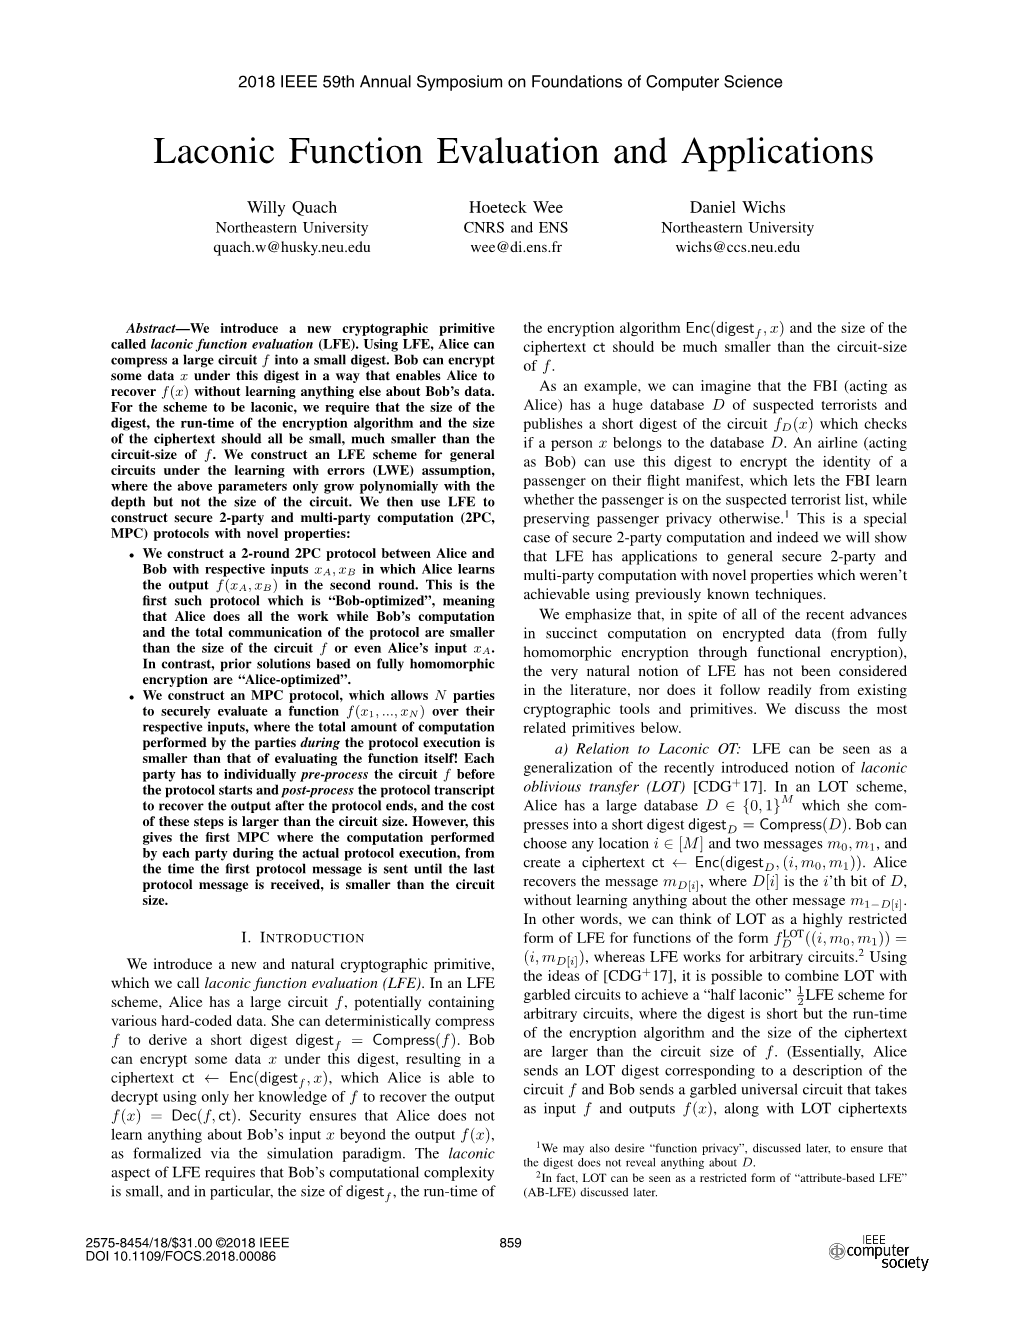 Laconic Function Evaluation and Applications